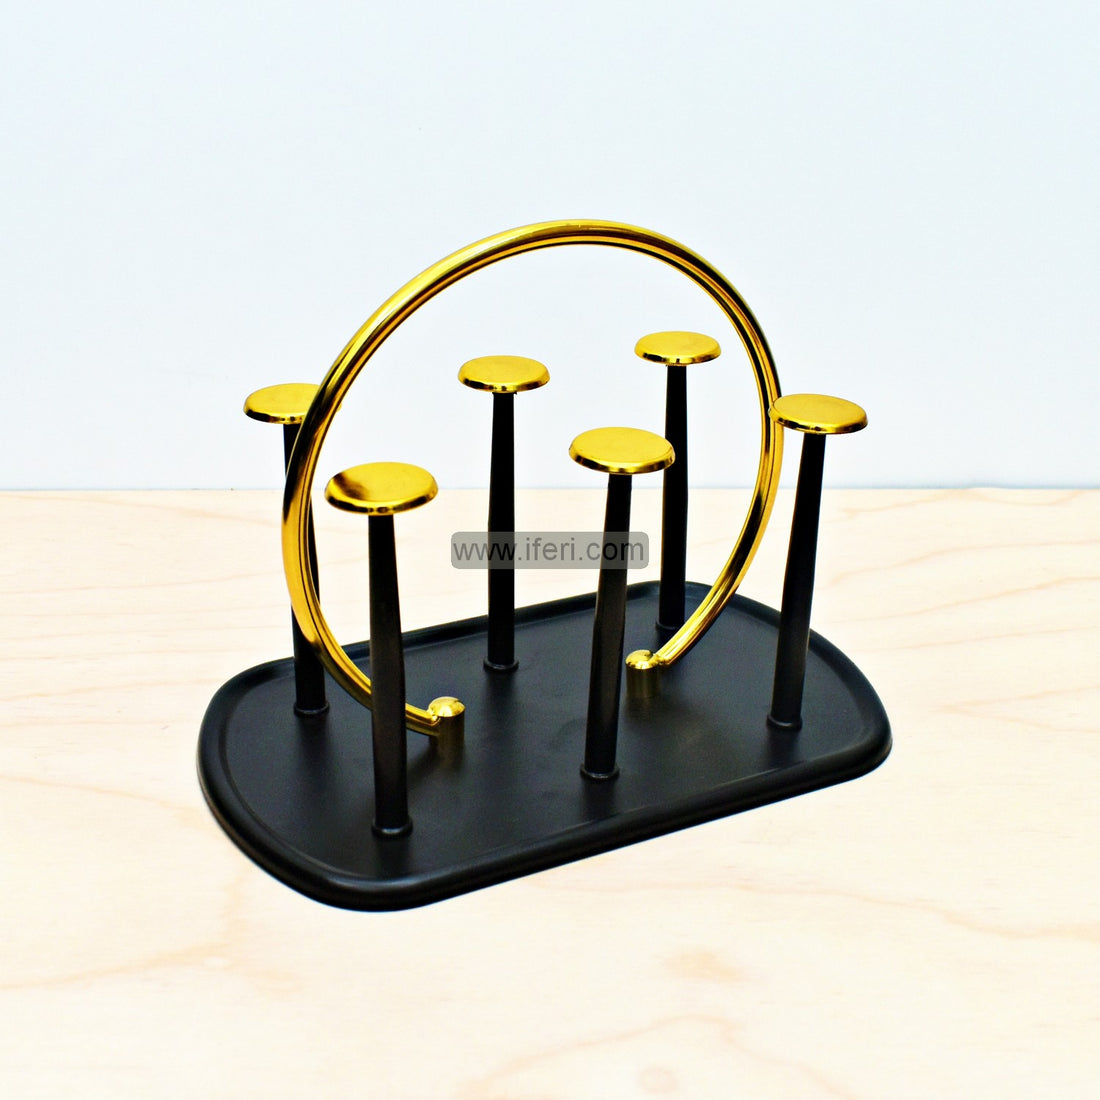 Buy Metal & Plastic Glass Stand through online from iferi.com in Bangladesh